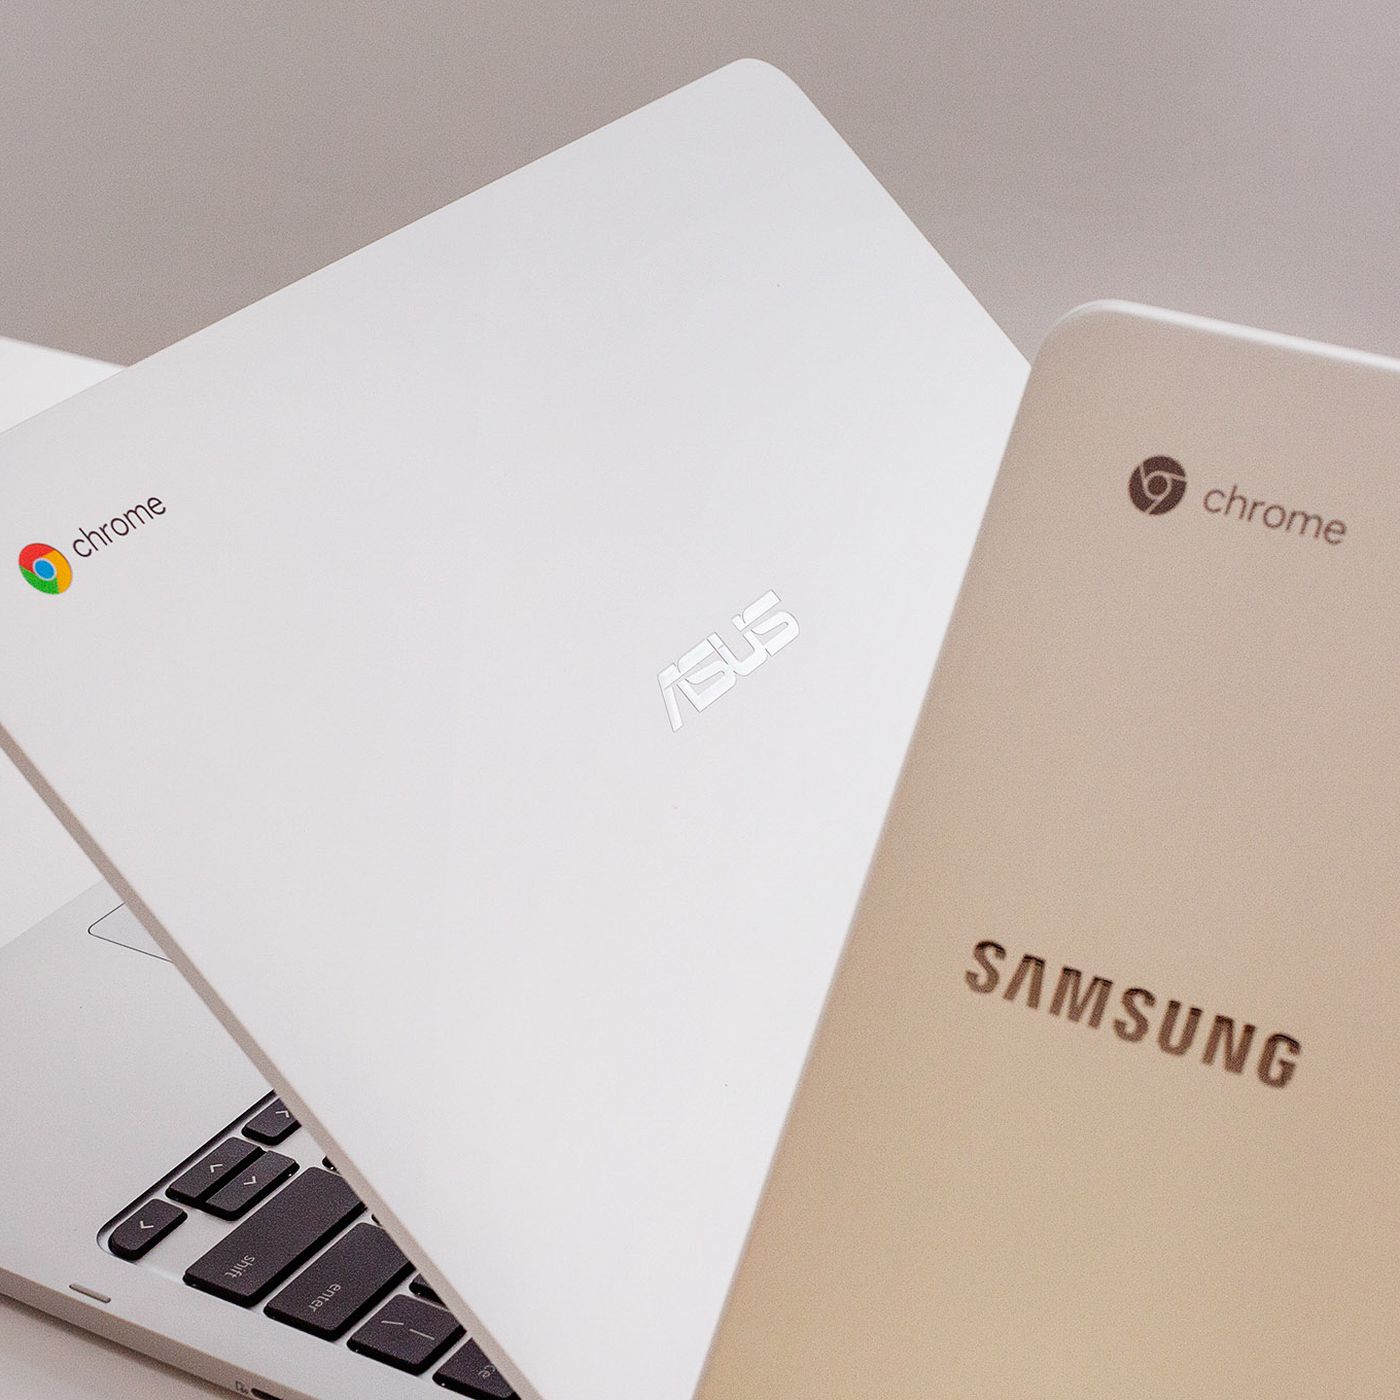 Google Reveals Which Of The Latest Chromebooks Will Get Android